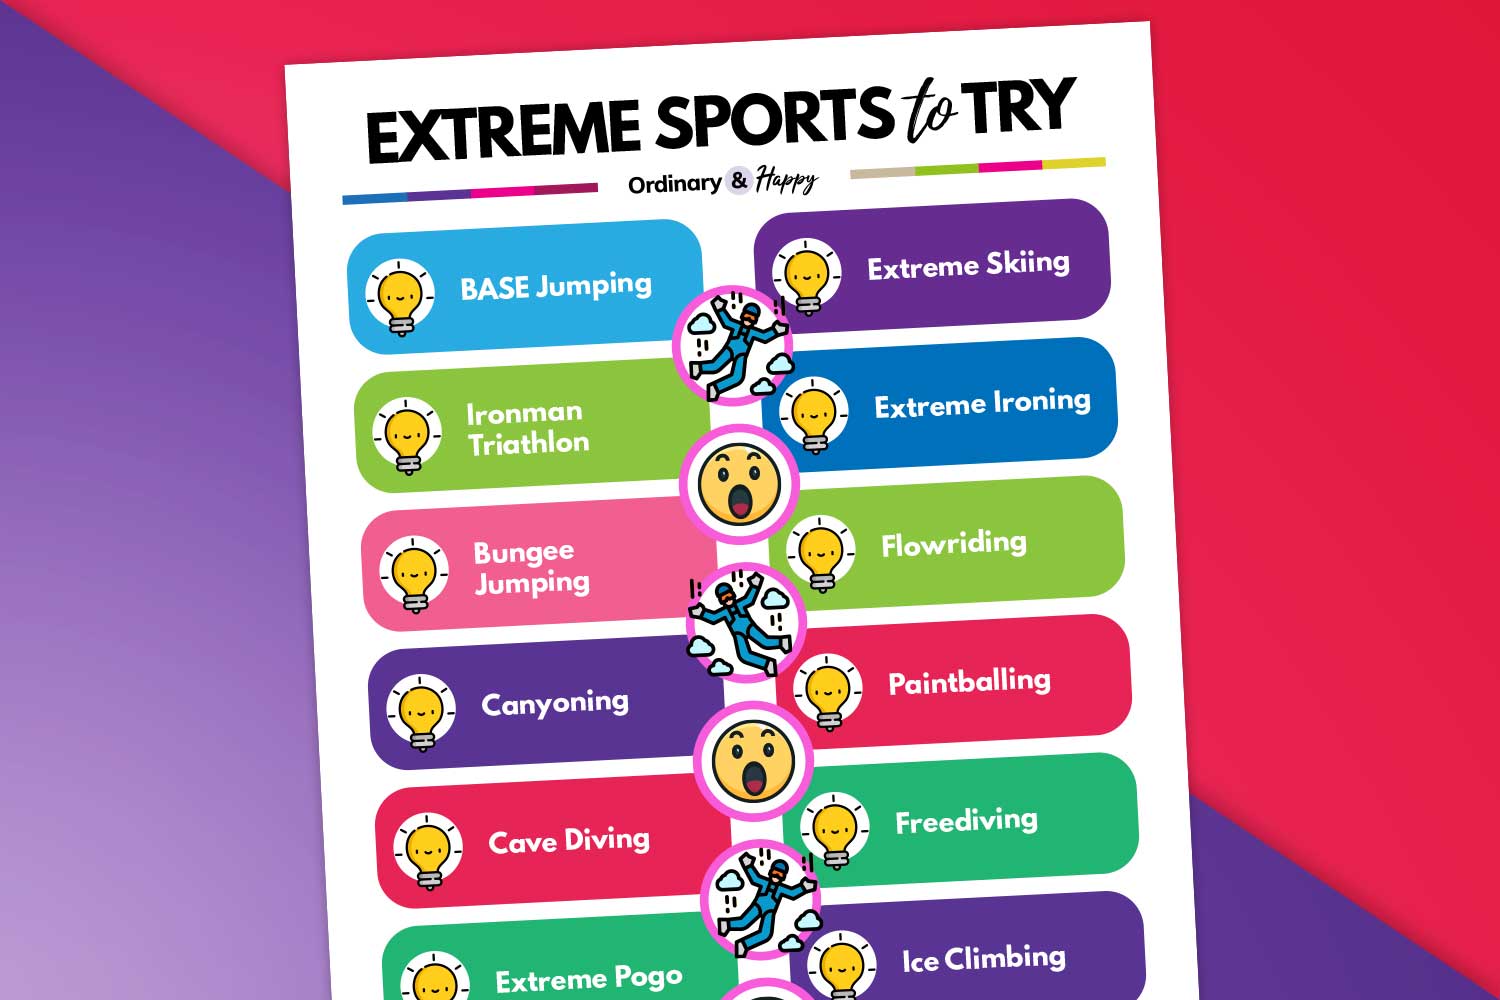 Extreme Sports (list of sports 1-14 from the article)